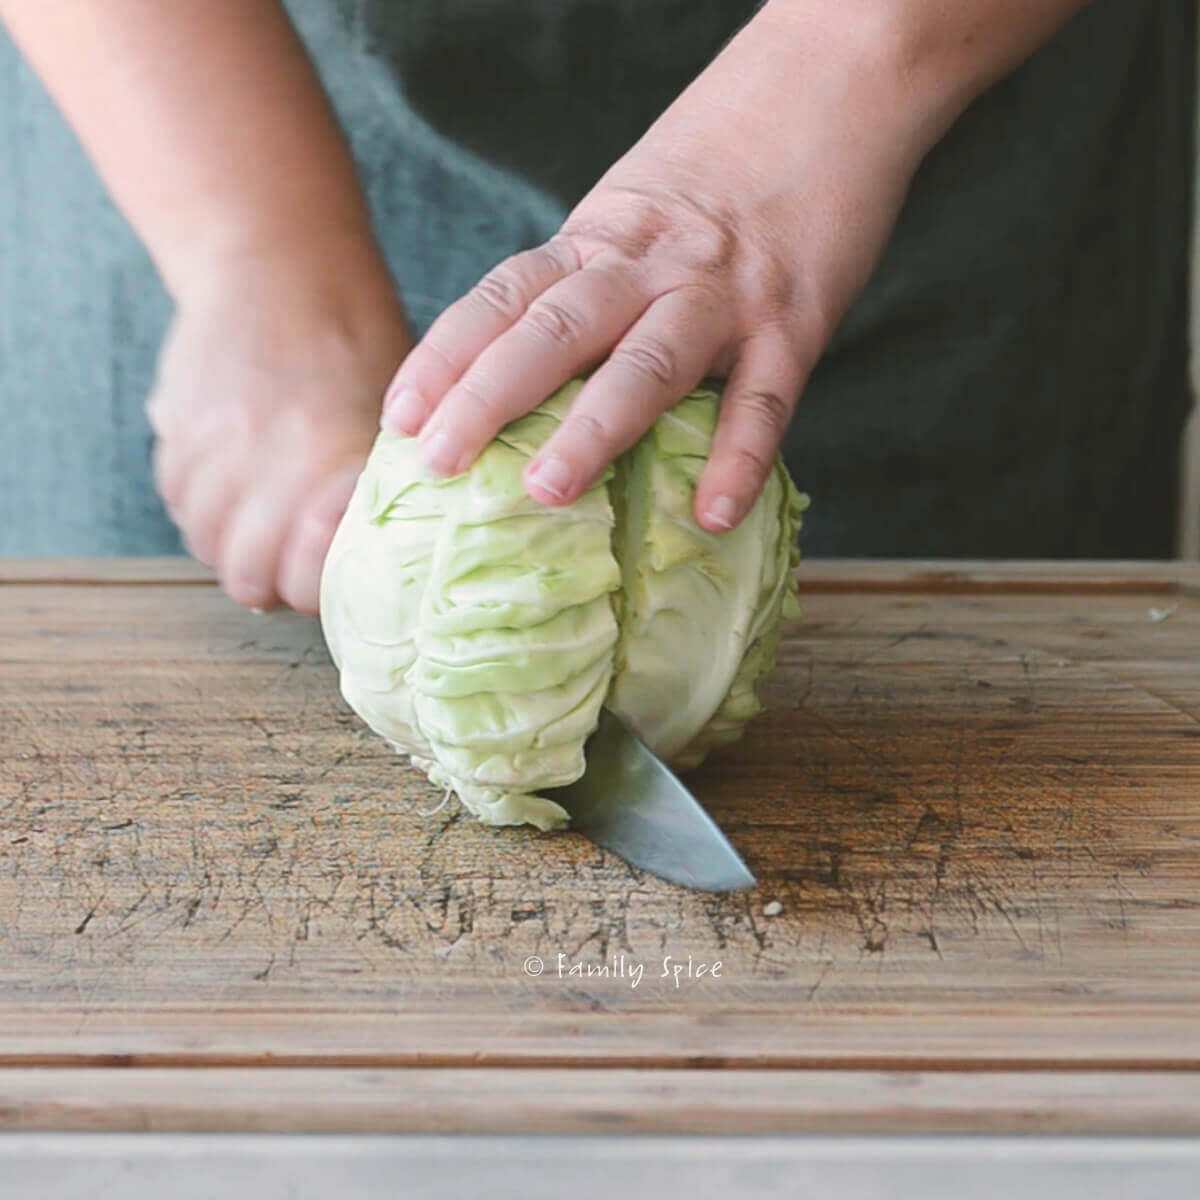 Cutting a green cabbage in half on a wooden cutting board